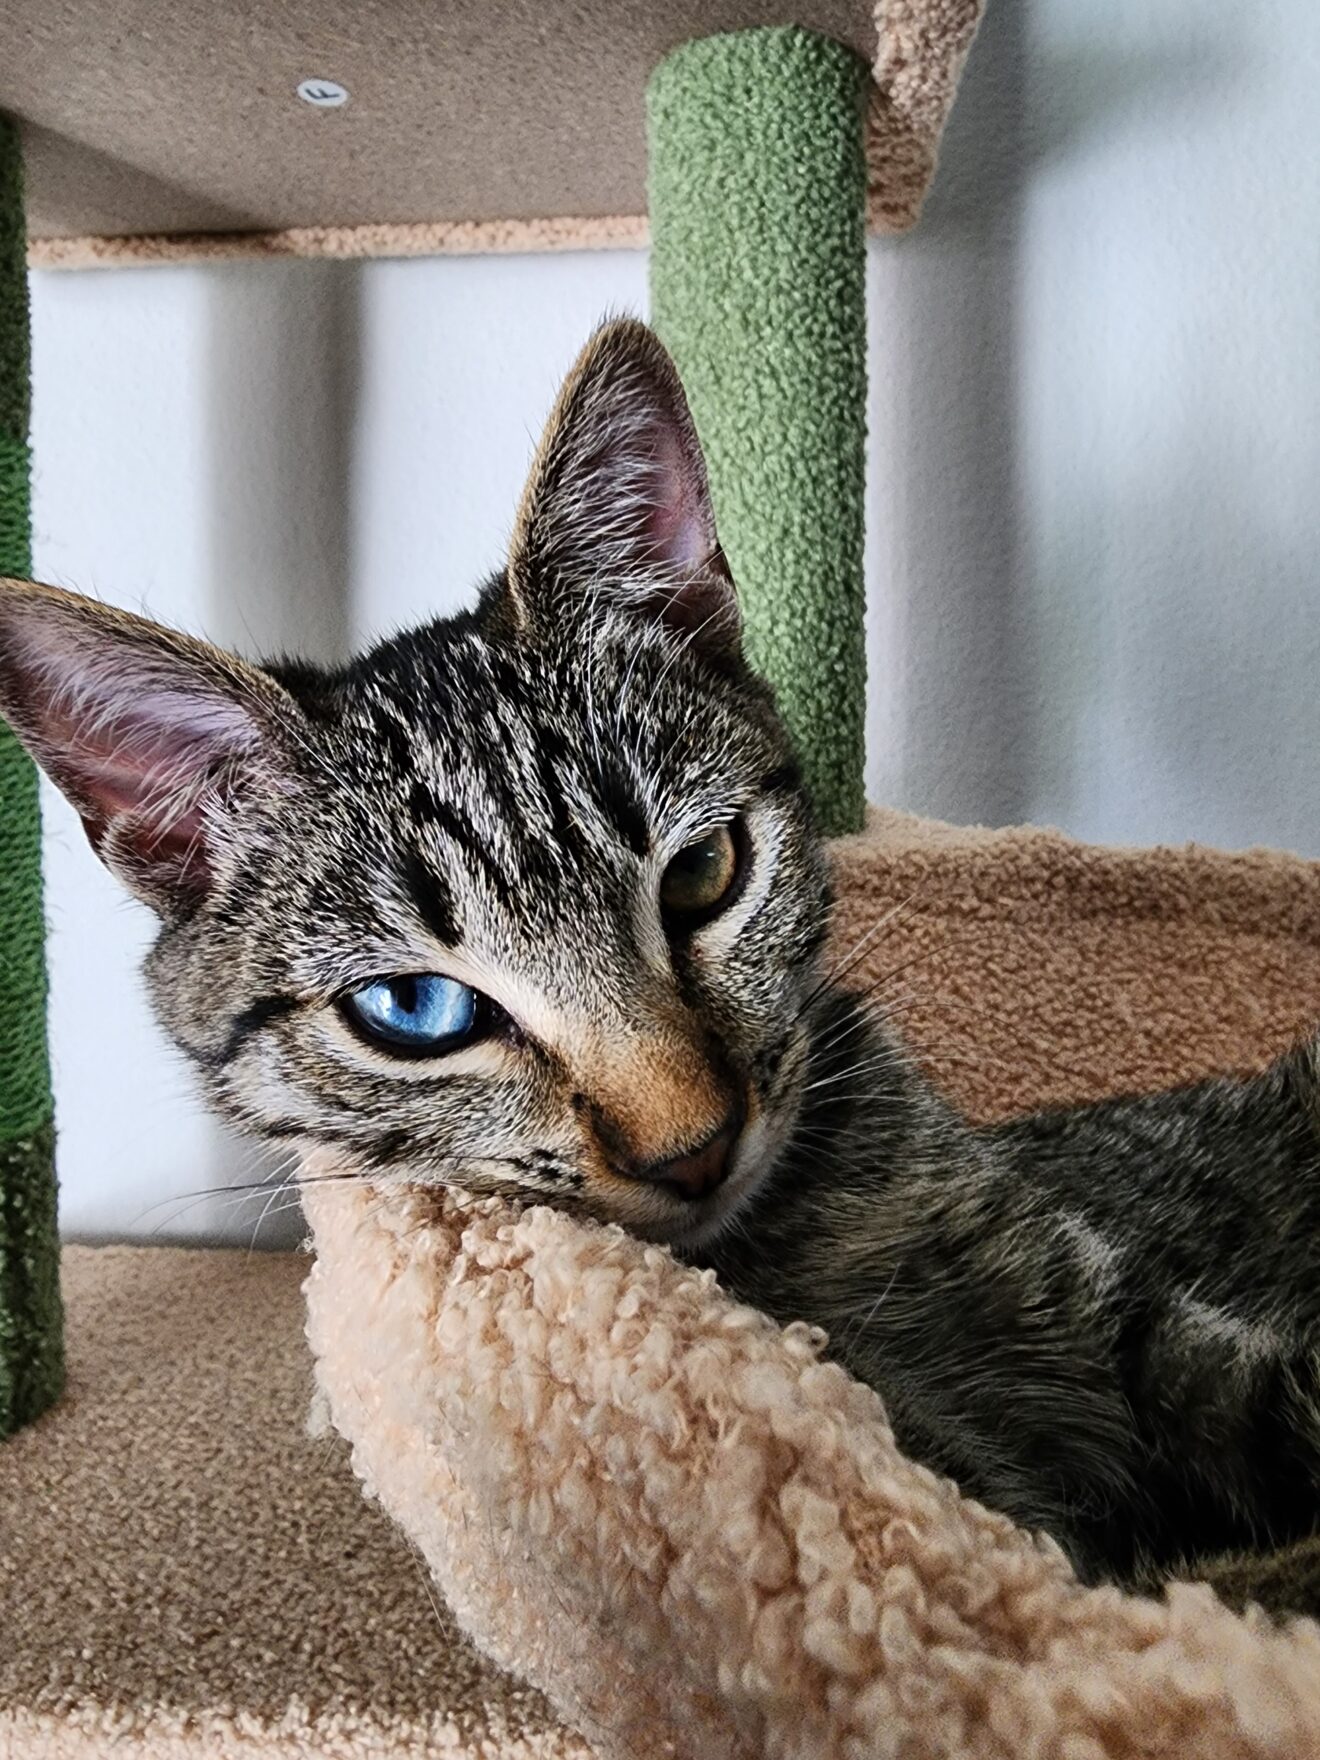 A tabby cat with one blue and one hazel eye laying in a tan cat bed.